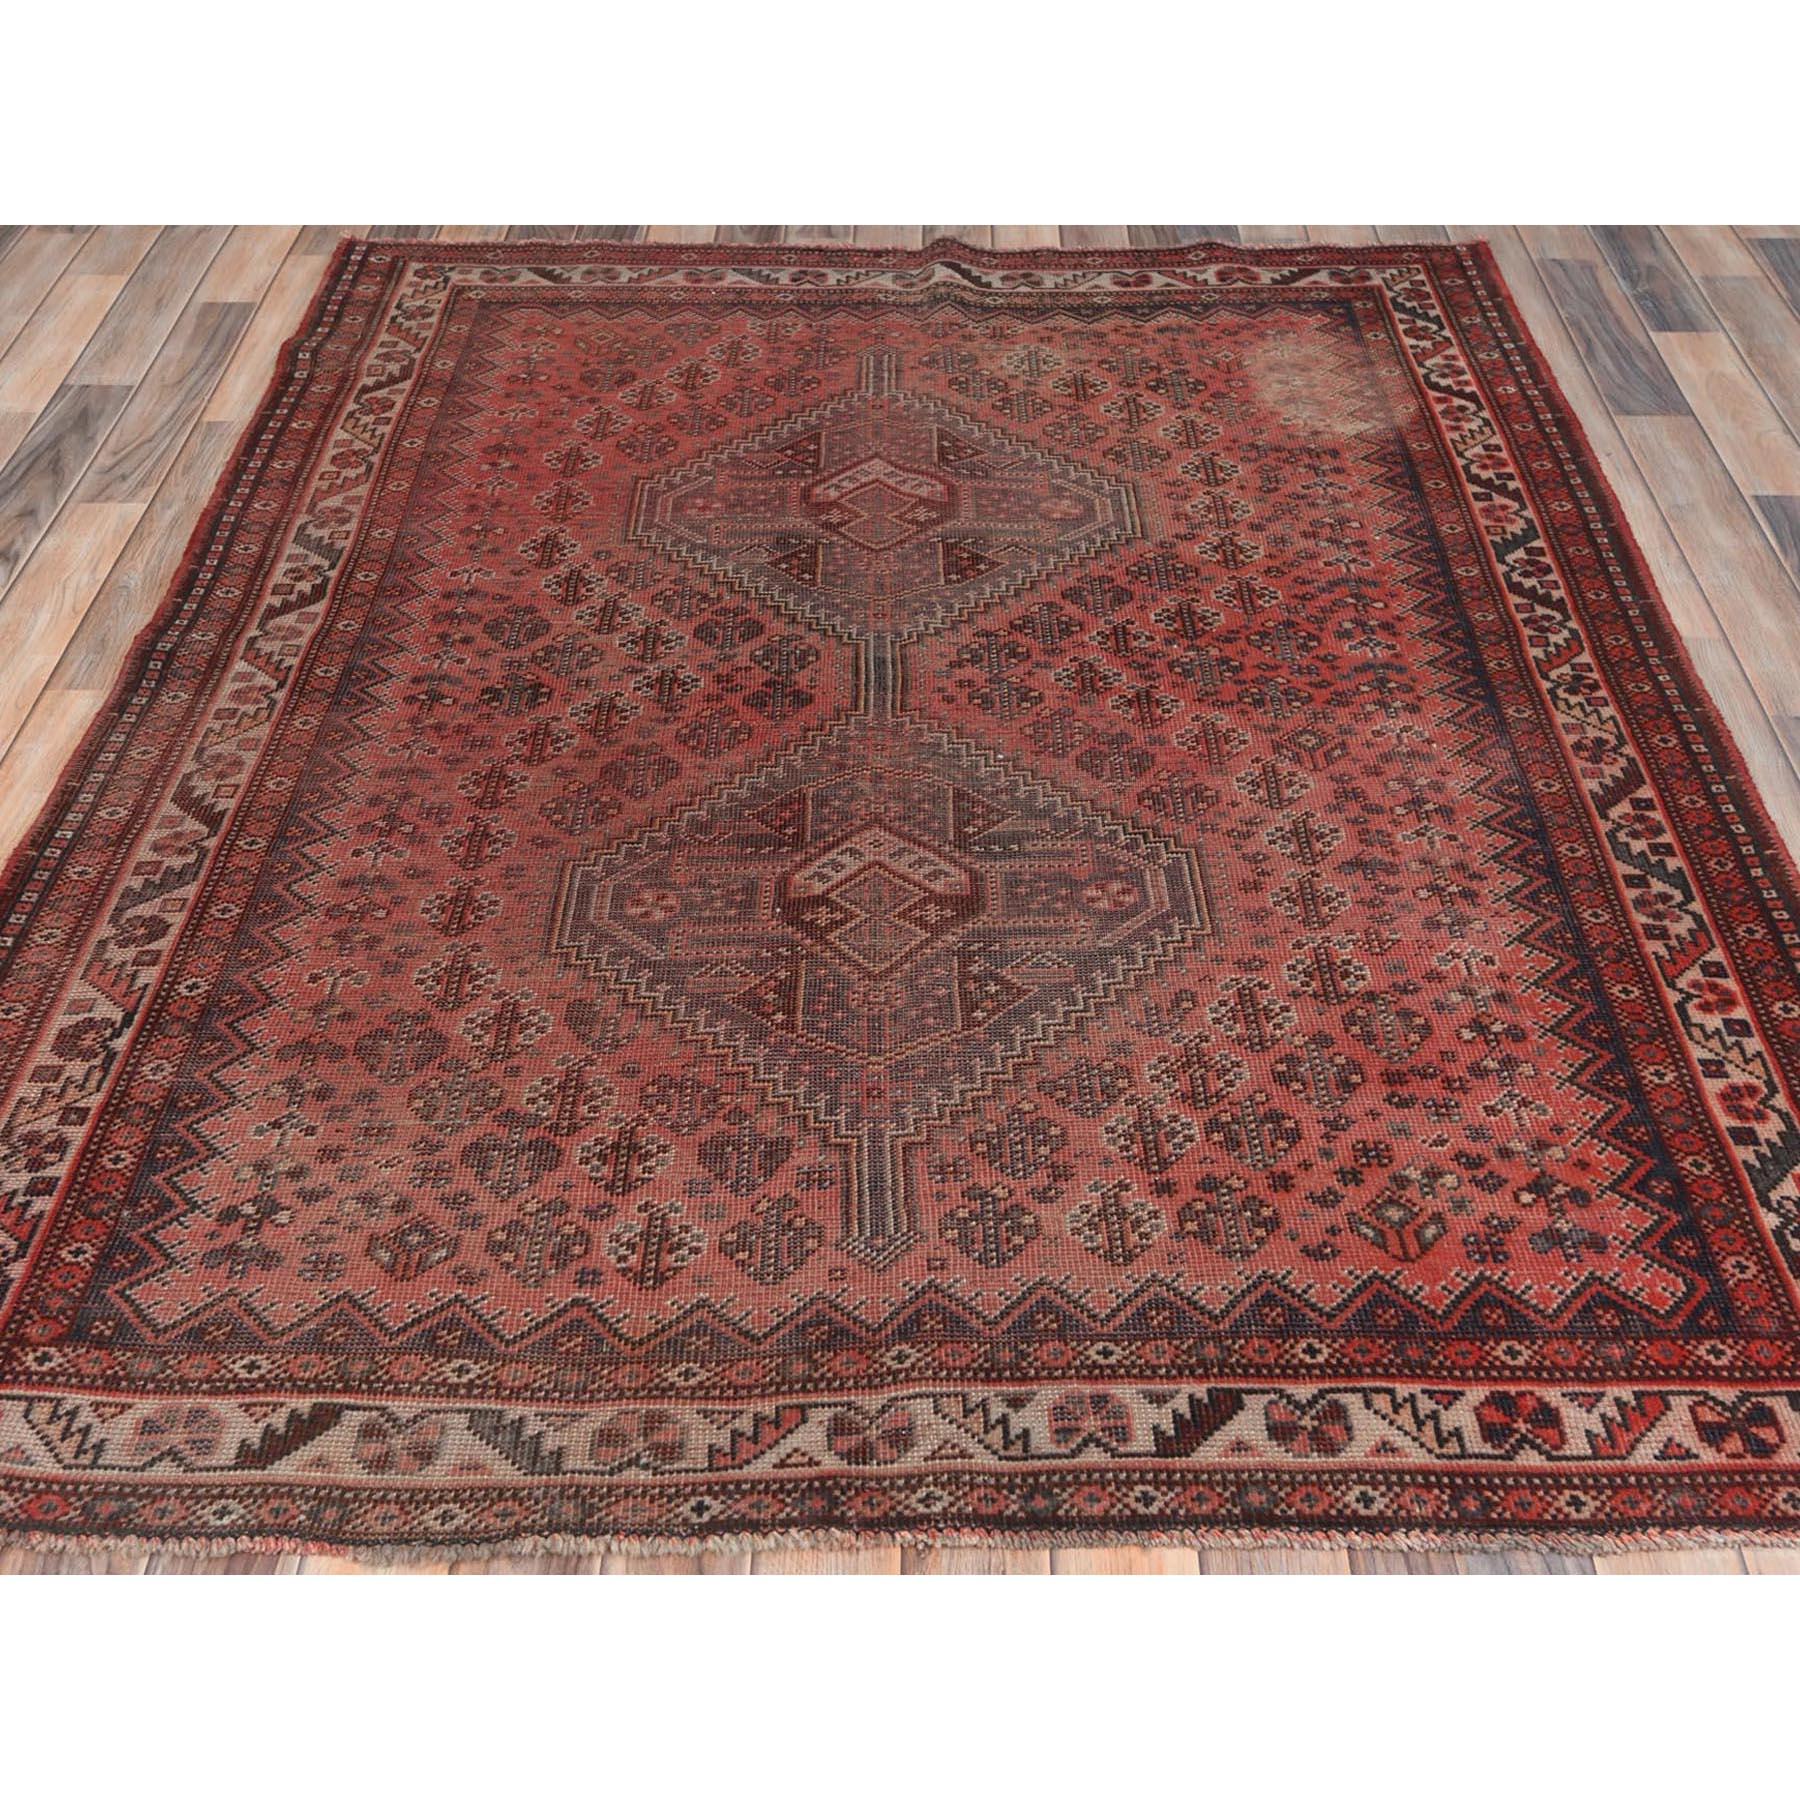 This fabulous hand-knotted carpet has been created and designed for extra strength and durability. This rug has been handcrafted for weeks in the traditional method that is used to make
Exact Rug Size in Feet and Inches : 5'2